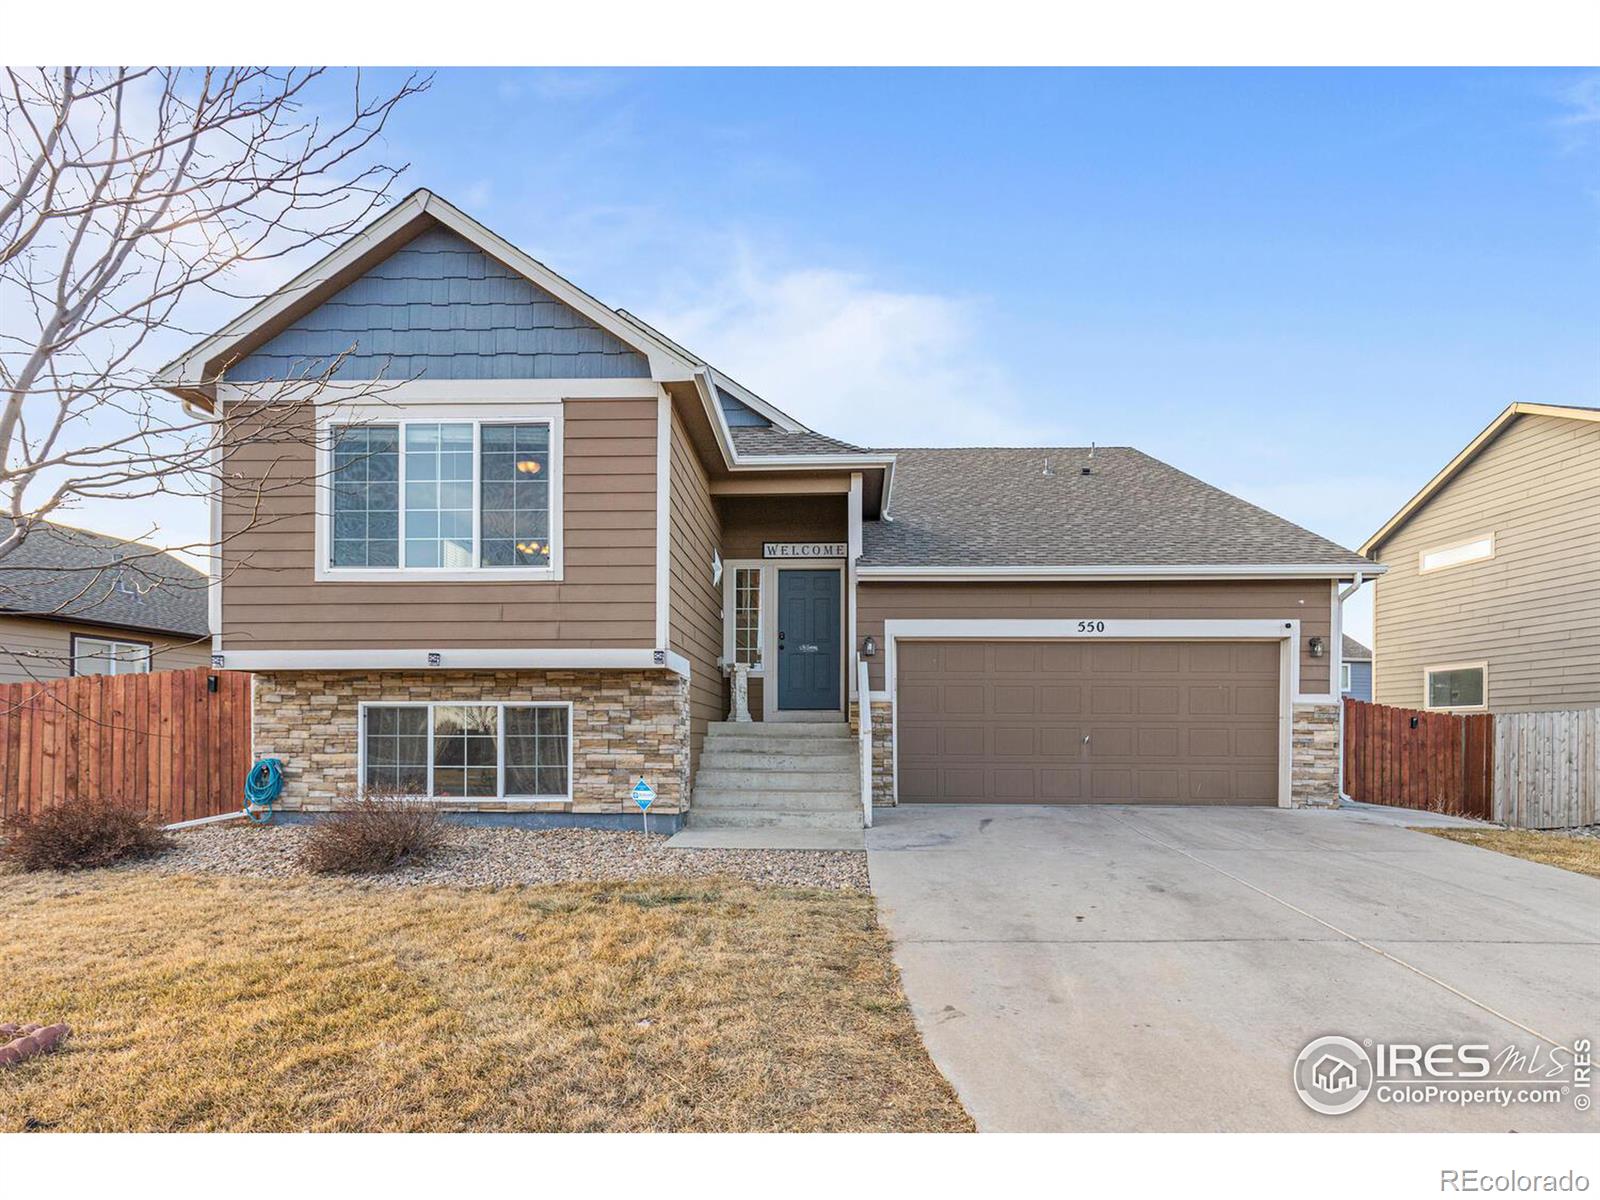 550 E 28th St Rd, greeley MLS: 4567891001246 Beds: 5 Baths: 3 Price: $406,000